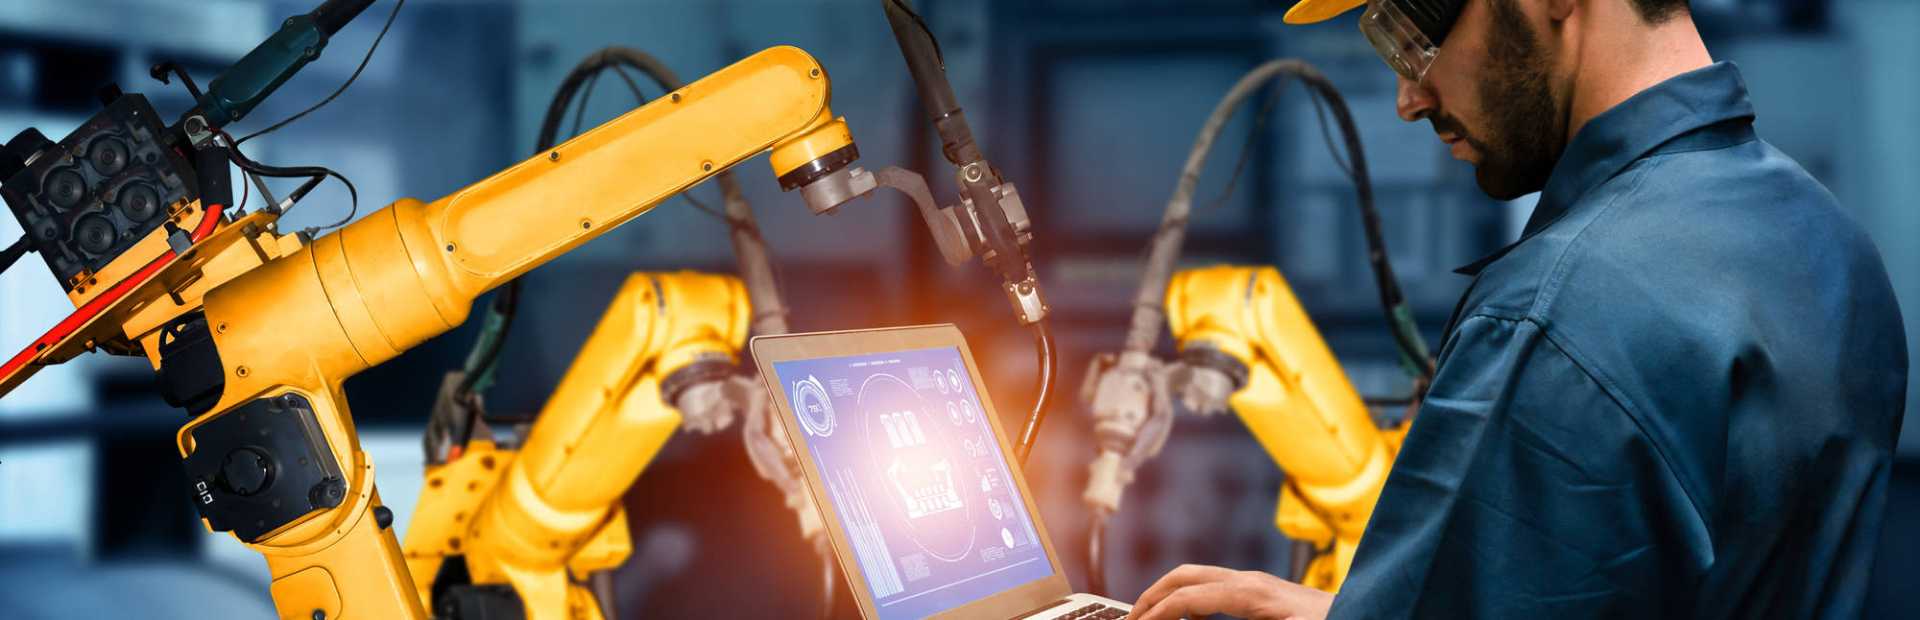 Elevate Your Industrial Expertise with Industry 4.0 Trainings and Certification